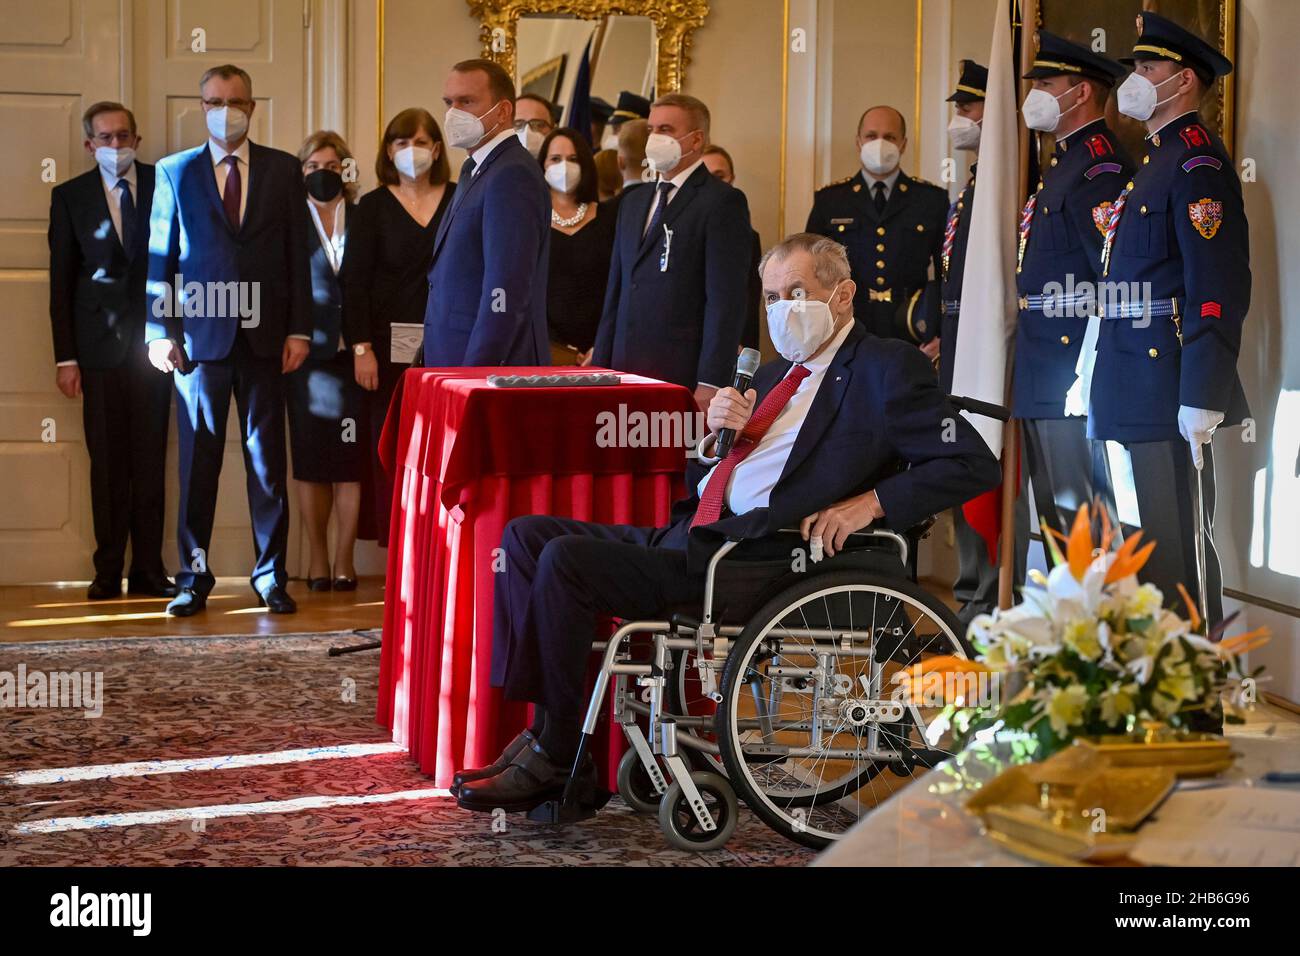 Lany, Czech Republic. 17th Dec, 2021. Czech President Milos Zeman, in the wheelchair, appointed ministers of new Czech cabinet of Petr Fiala, comprising five parties - ODS, KDU-CSL, TOP 09, Pirates and STAN, on December 17, 2021, at the Lany Chateau, Czech Republic. Credit: Vit Simanek/CTK Photo/Alamy Live News Stock Photo